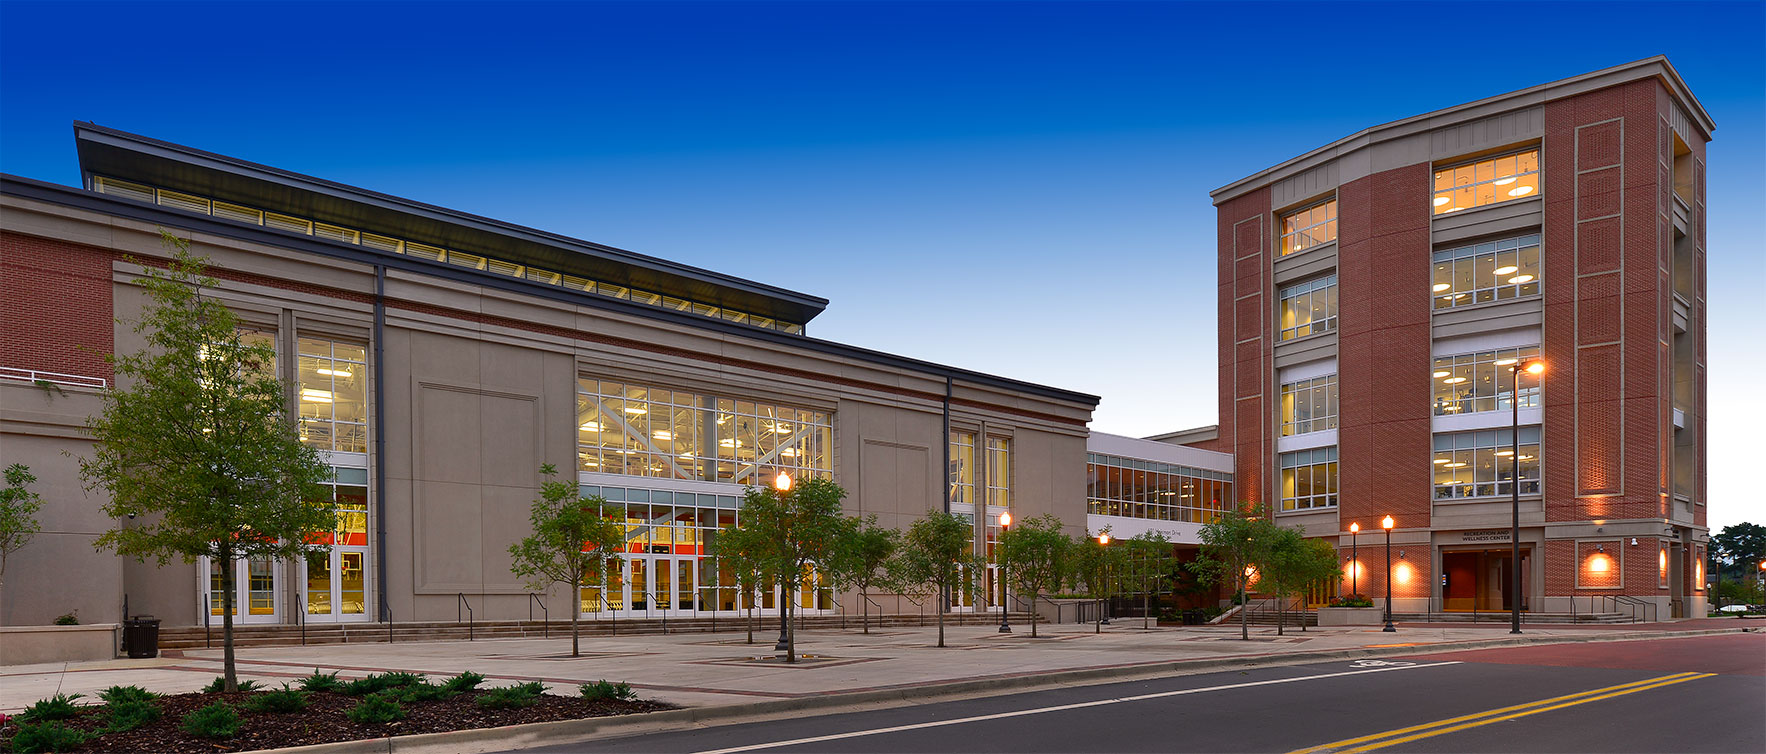 Exterior view of the Auburn University Recreation and Wellness Center